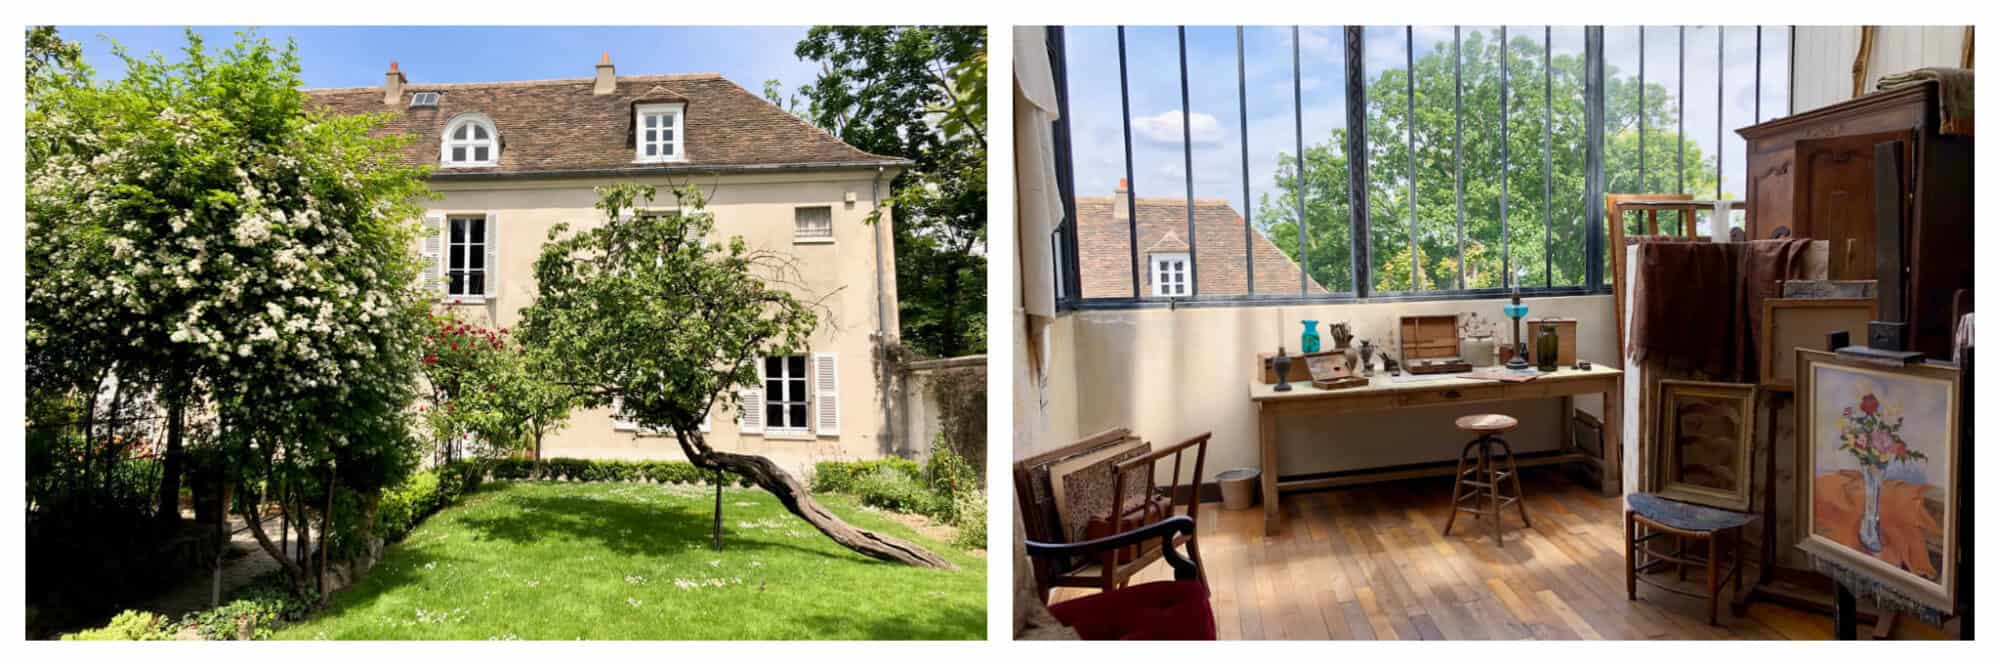 Left, the garden of the Musée Montmartre in Paris, featuring the oldest house in the area. Right, the atelier of Suzanne Valadon at the museum.